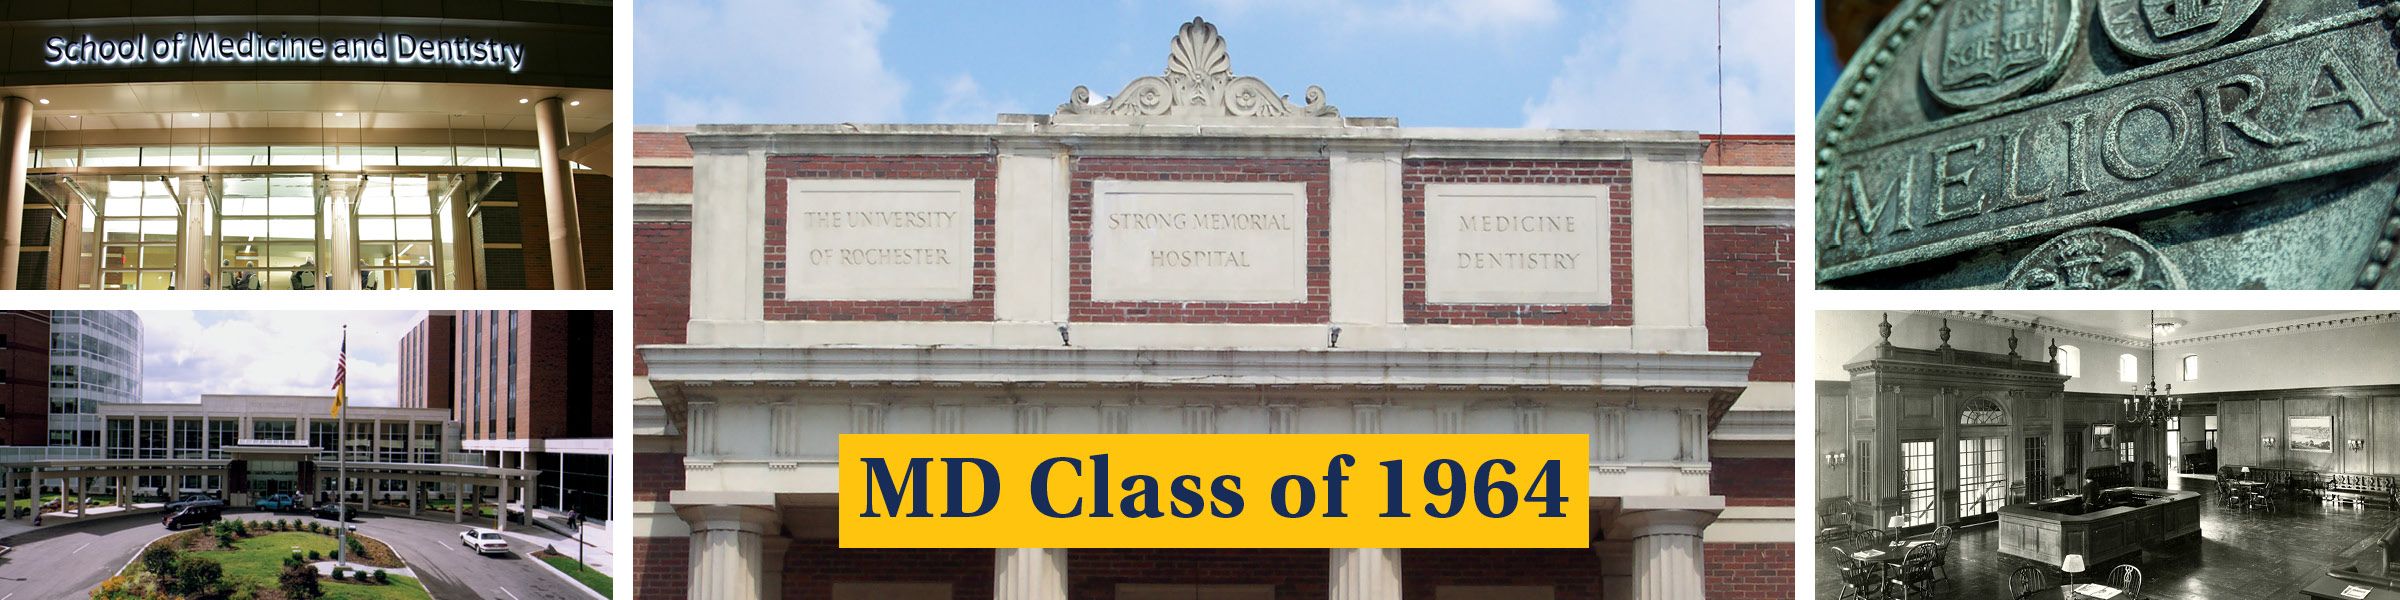 UR SMD Class of 1964